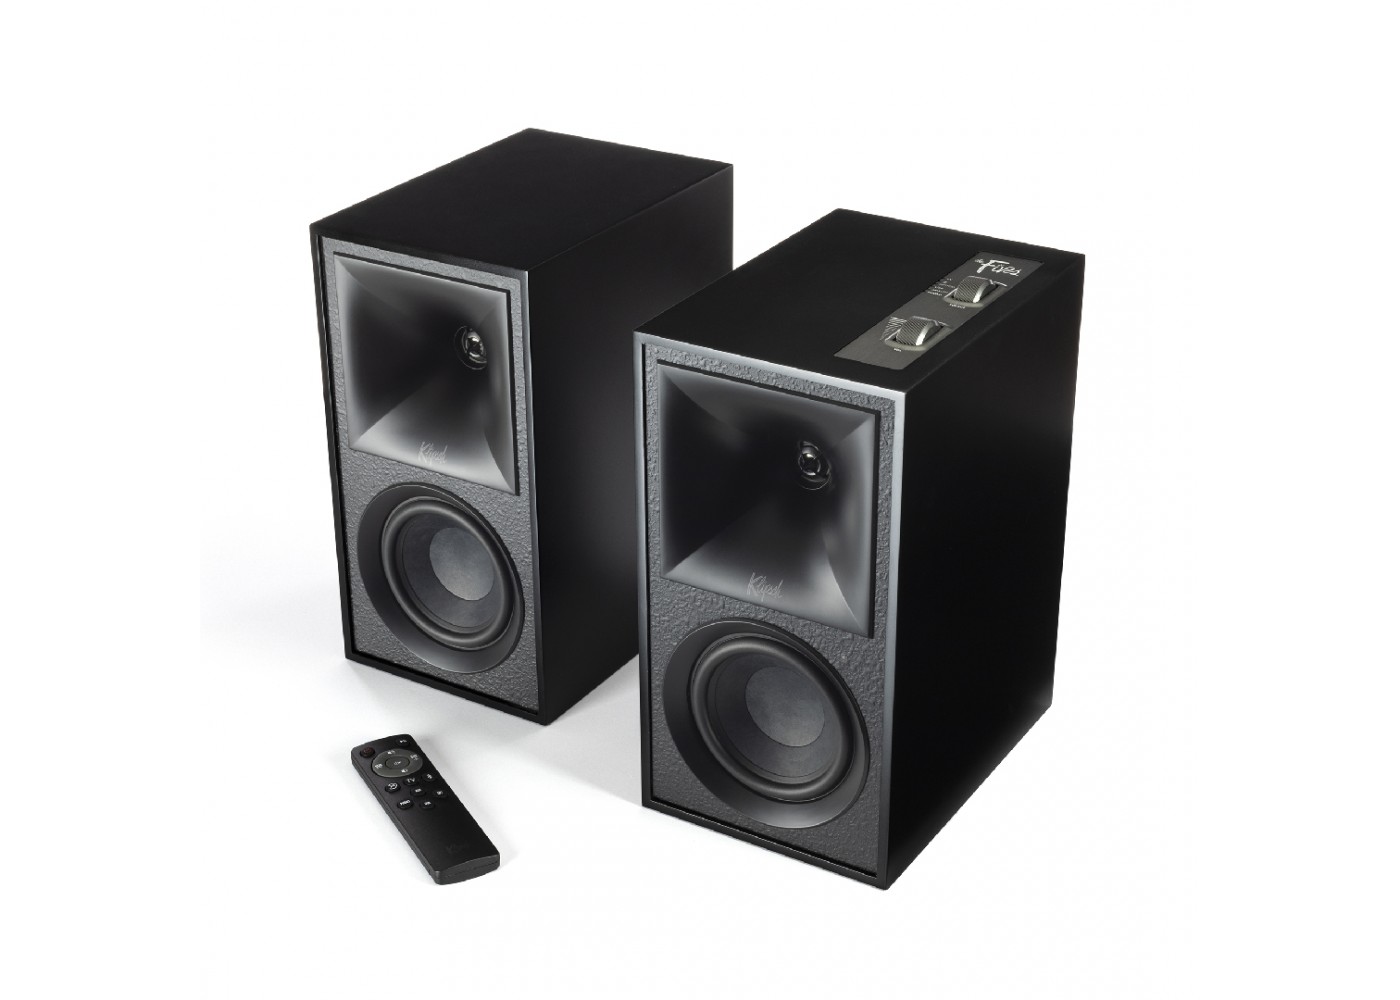 25% off select Klipsch Speakers with additional 15% coupon @ https://www.acousticsounddesign.com/